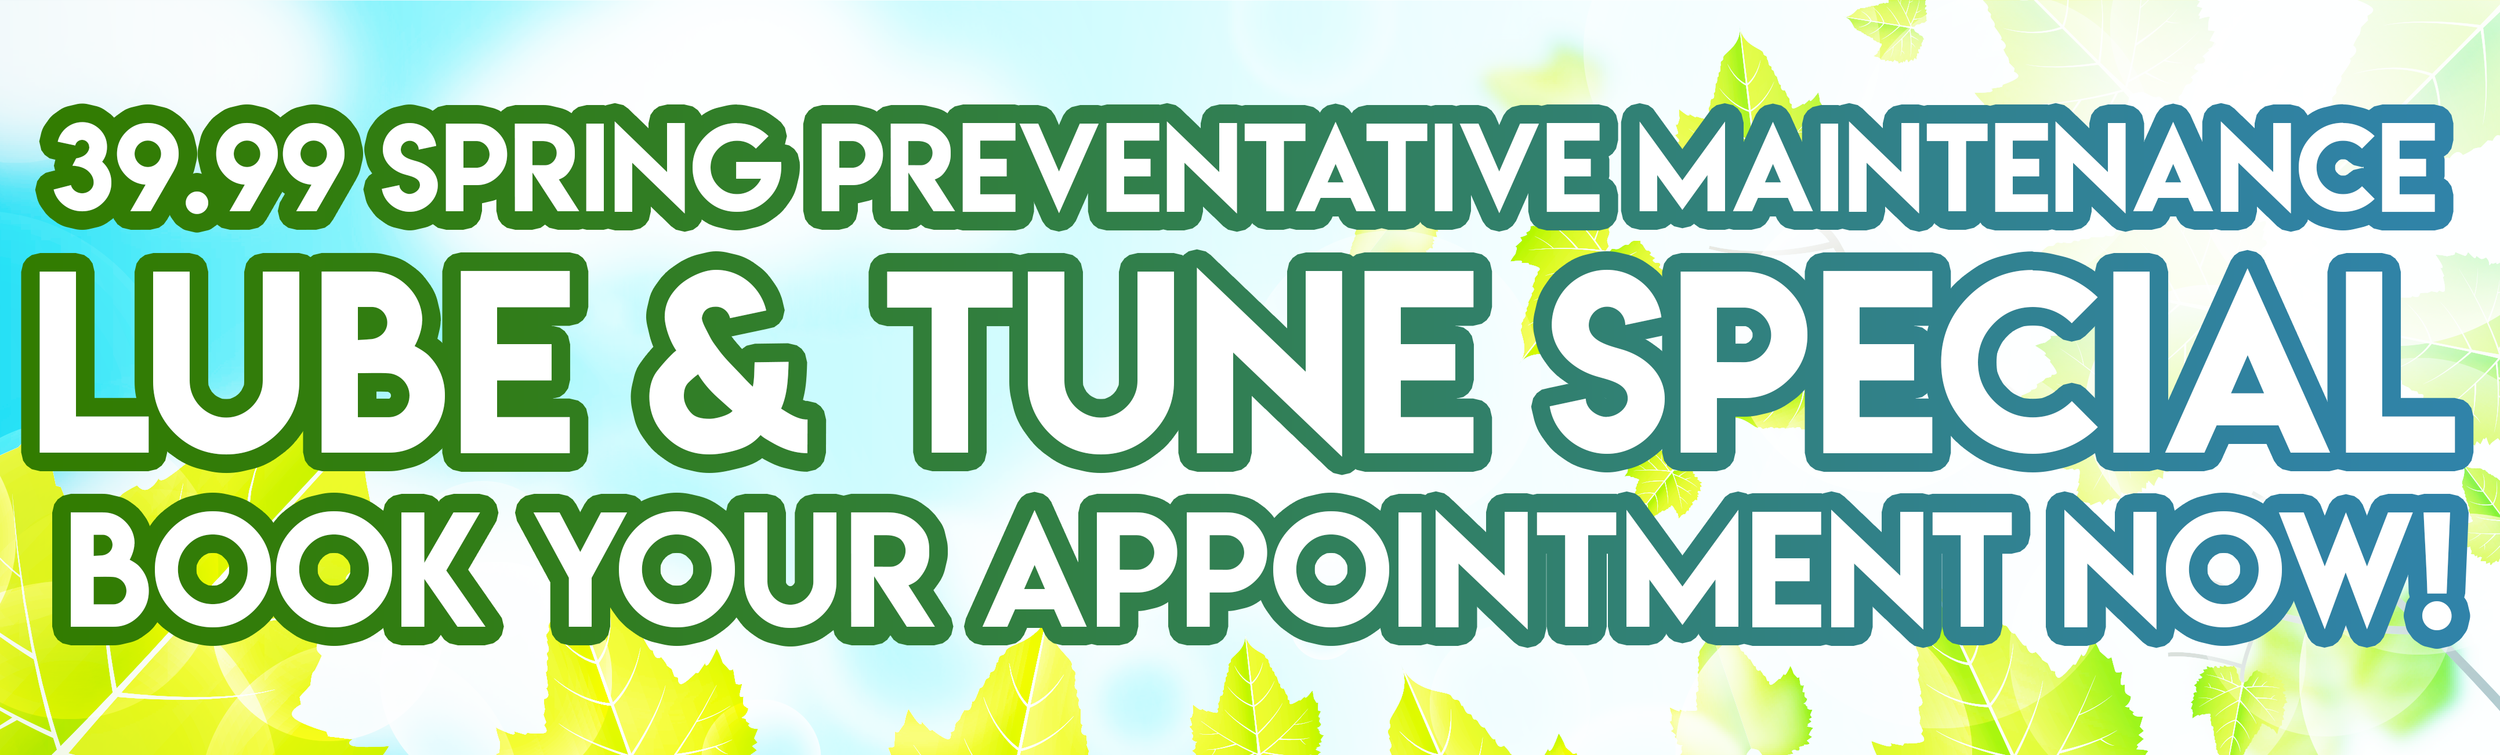 ad_special_spring_39_banner.png